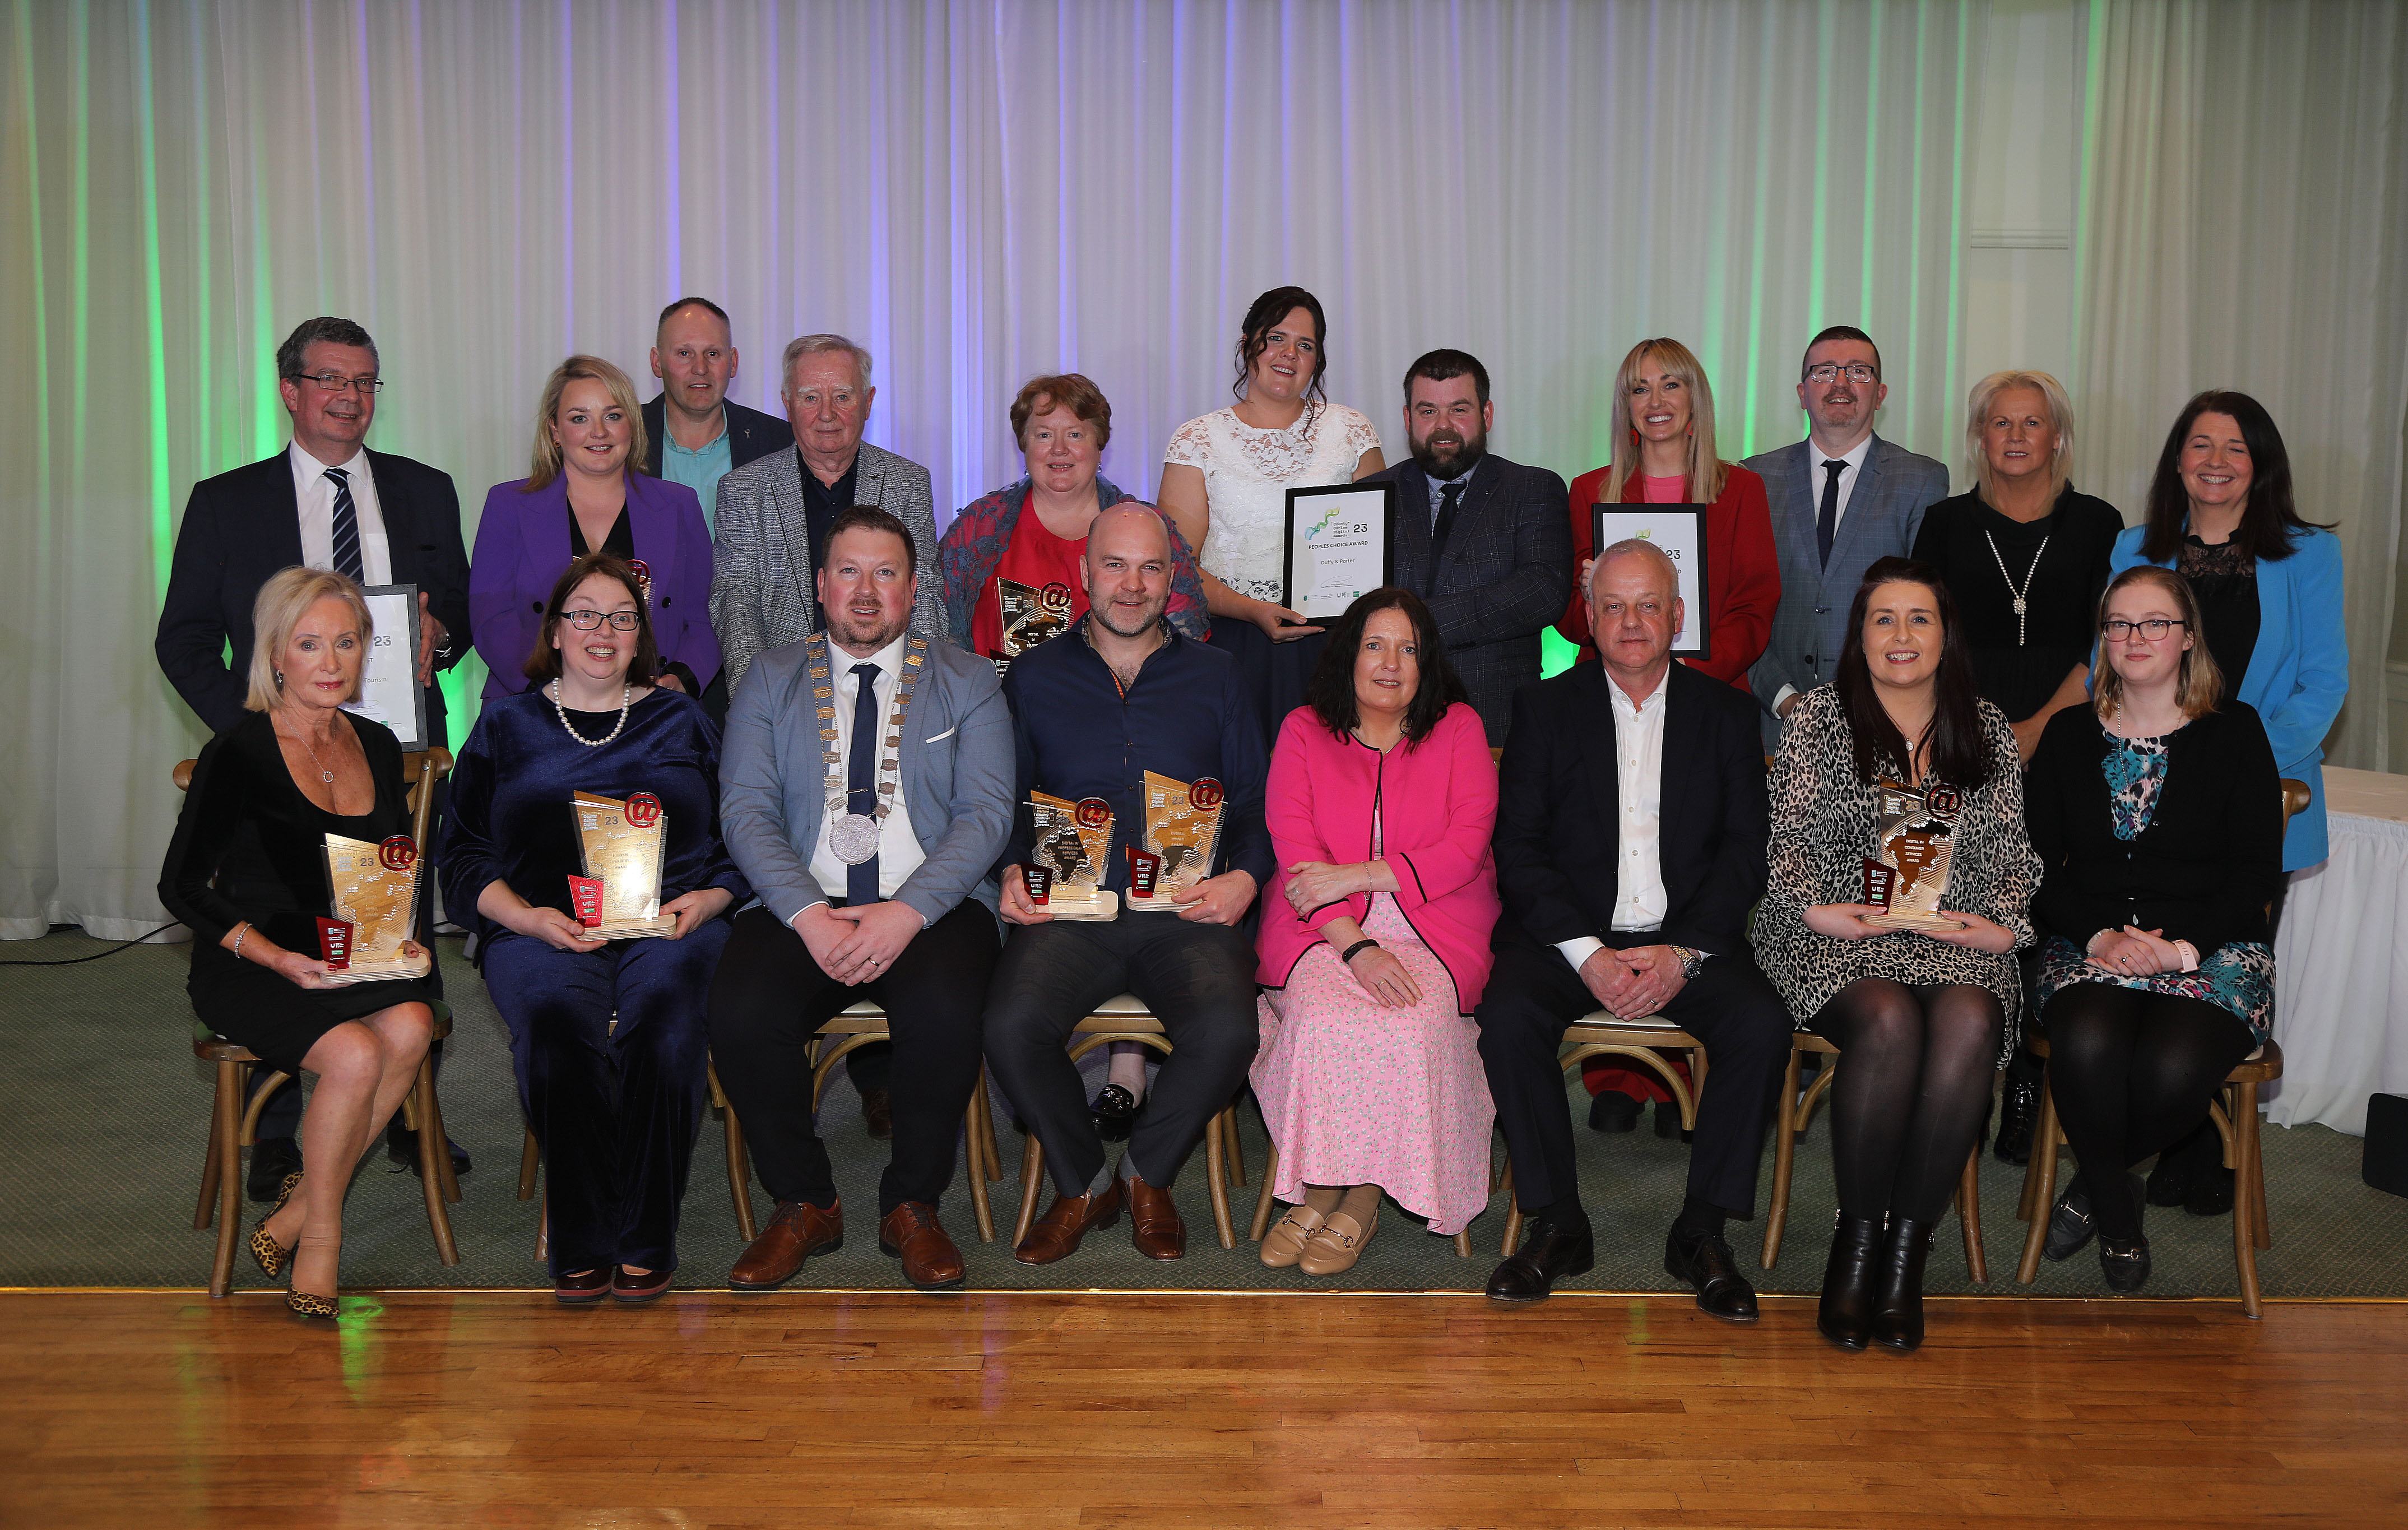 Winners in the Carlow Digital Awards pictured with sponsors and public representatives